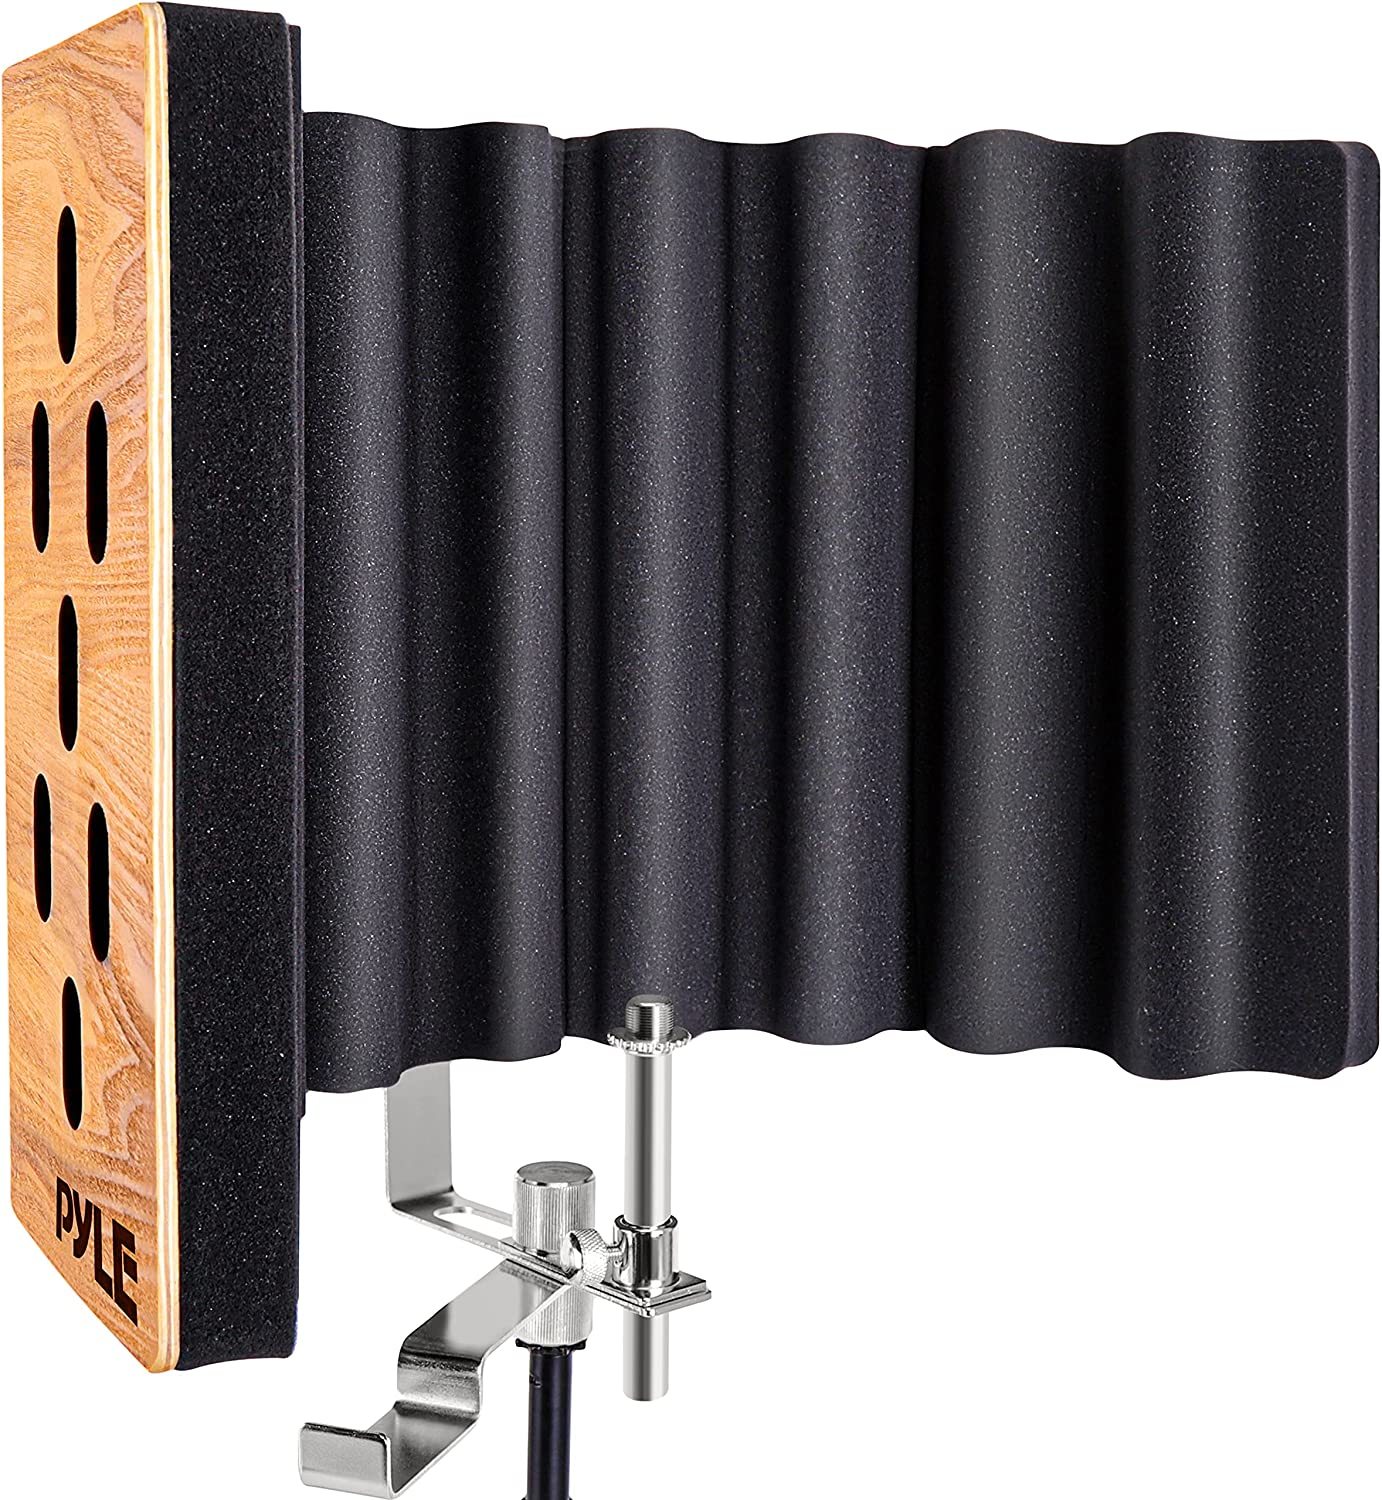 Pyle Wood Microphone Isolation Shield - Sound Isolation Recording Booth, Studio - $129.99